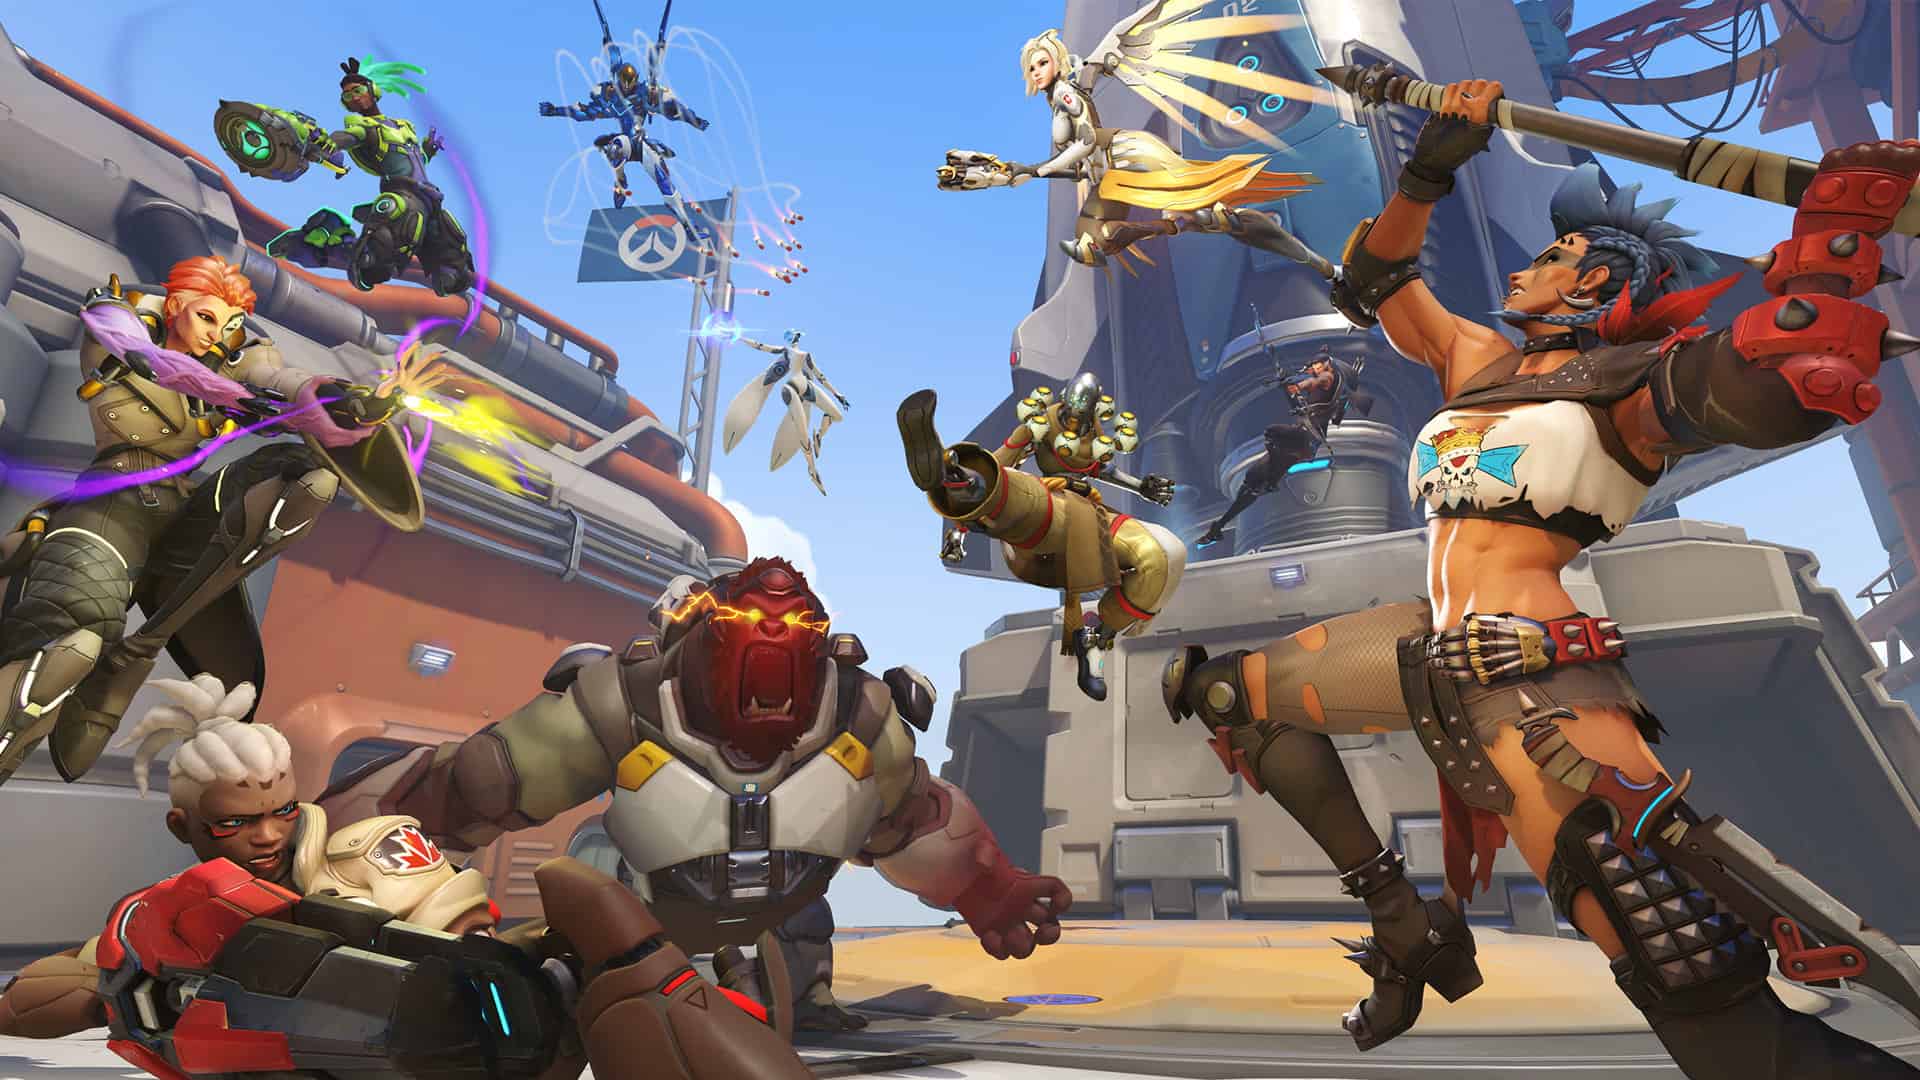 Overwatch 2 will replace Overwatch, Blizzard confirms